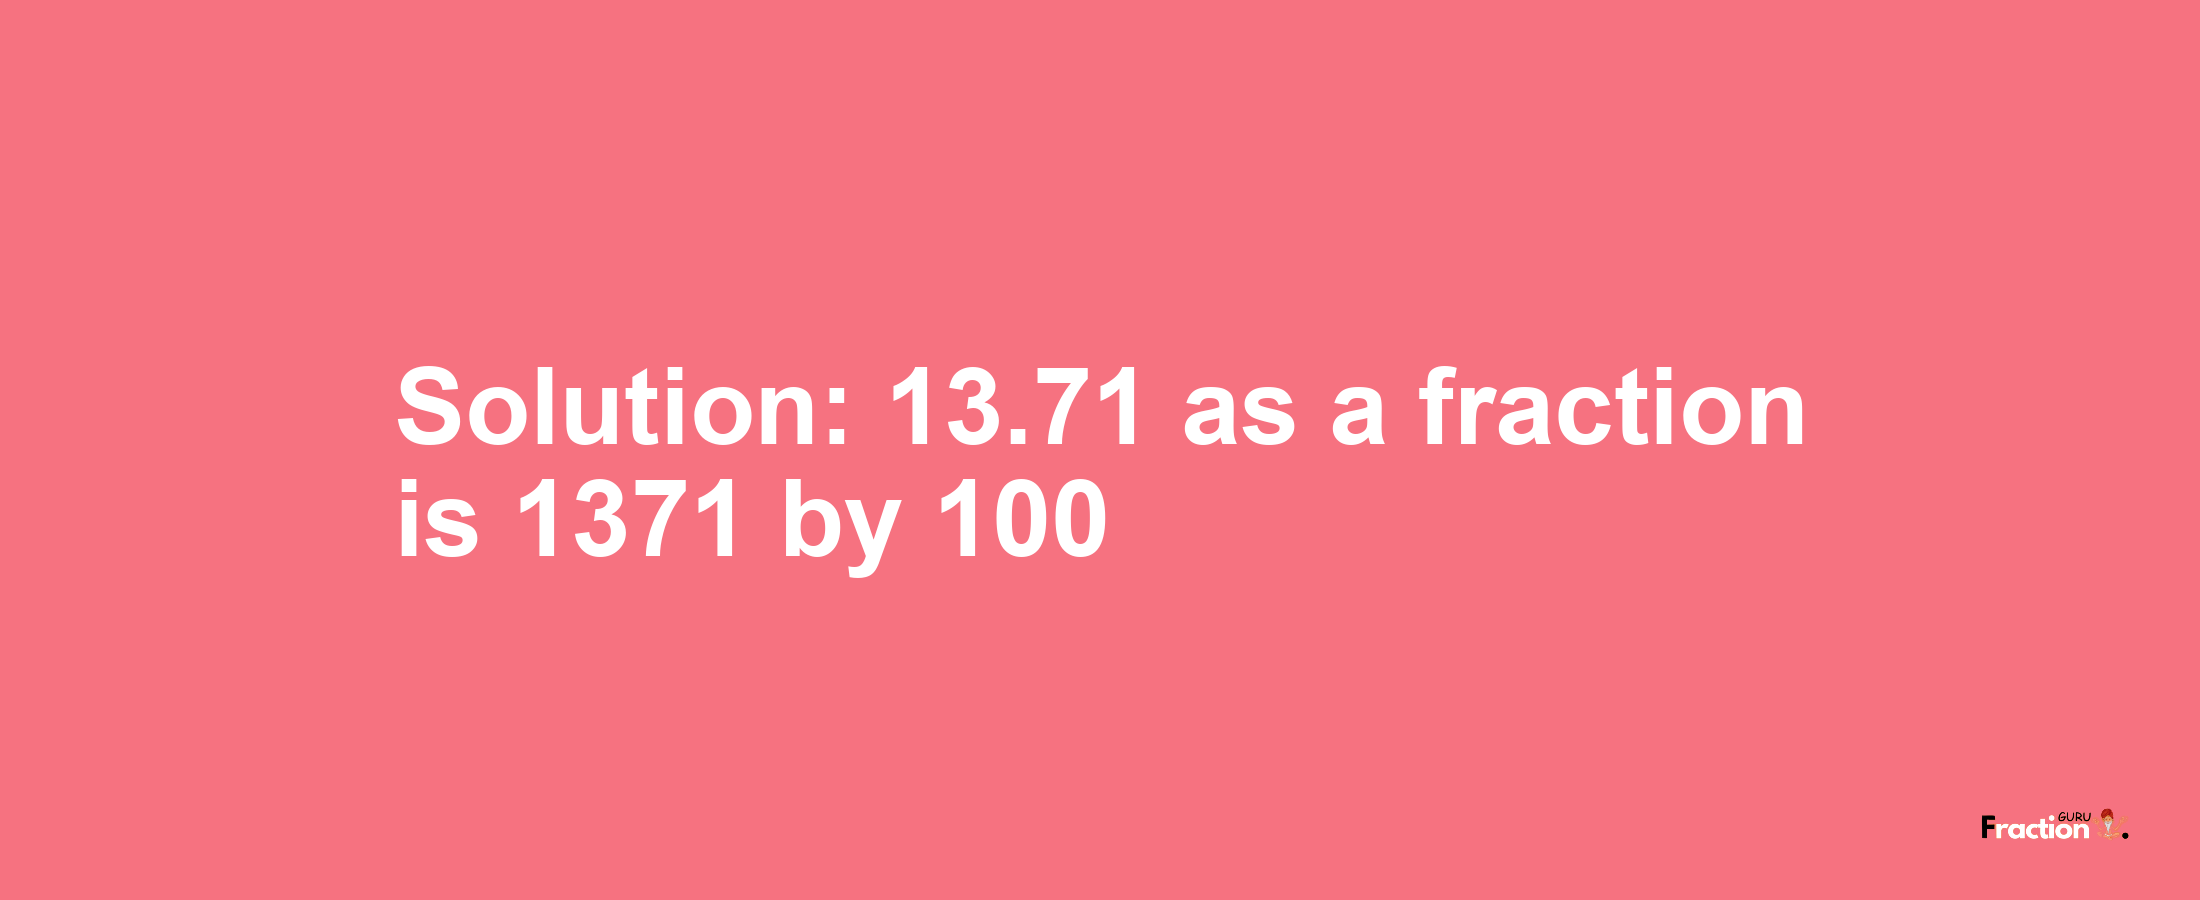 Solution:13.71 as a fraction is 1371/100